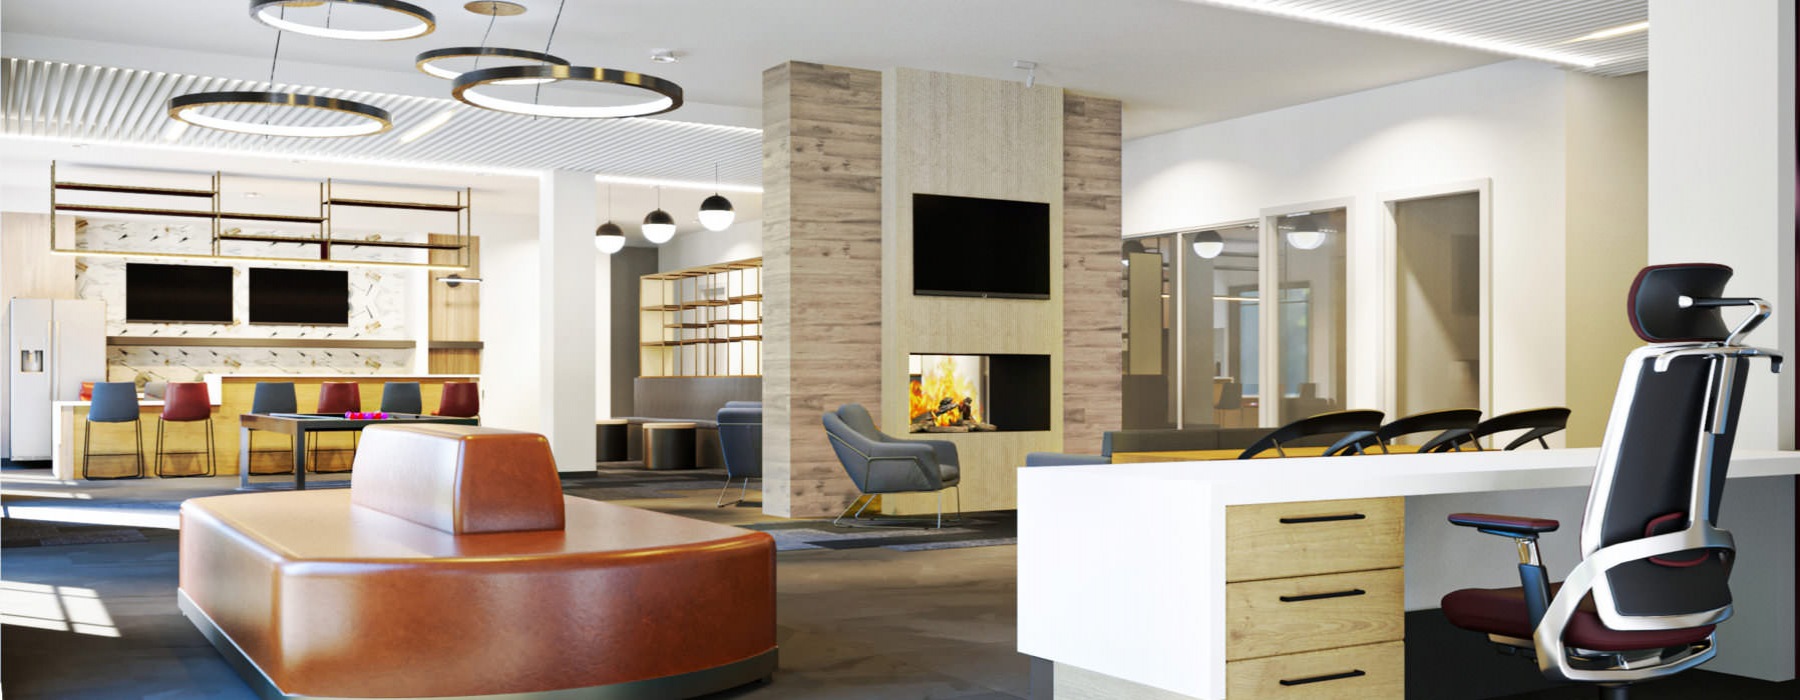 naturally lit amenity space in lobby with double sided fireplace